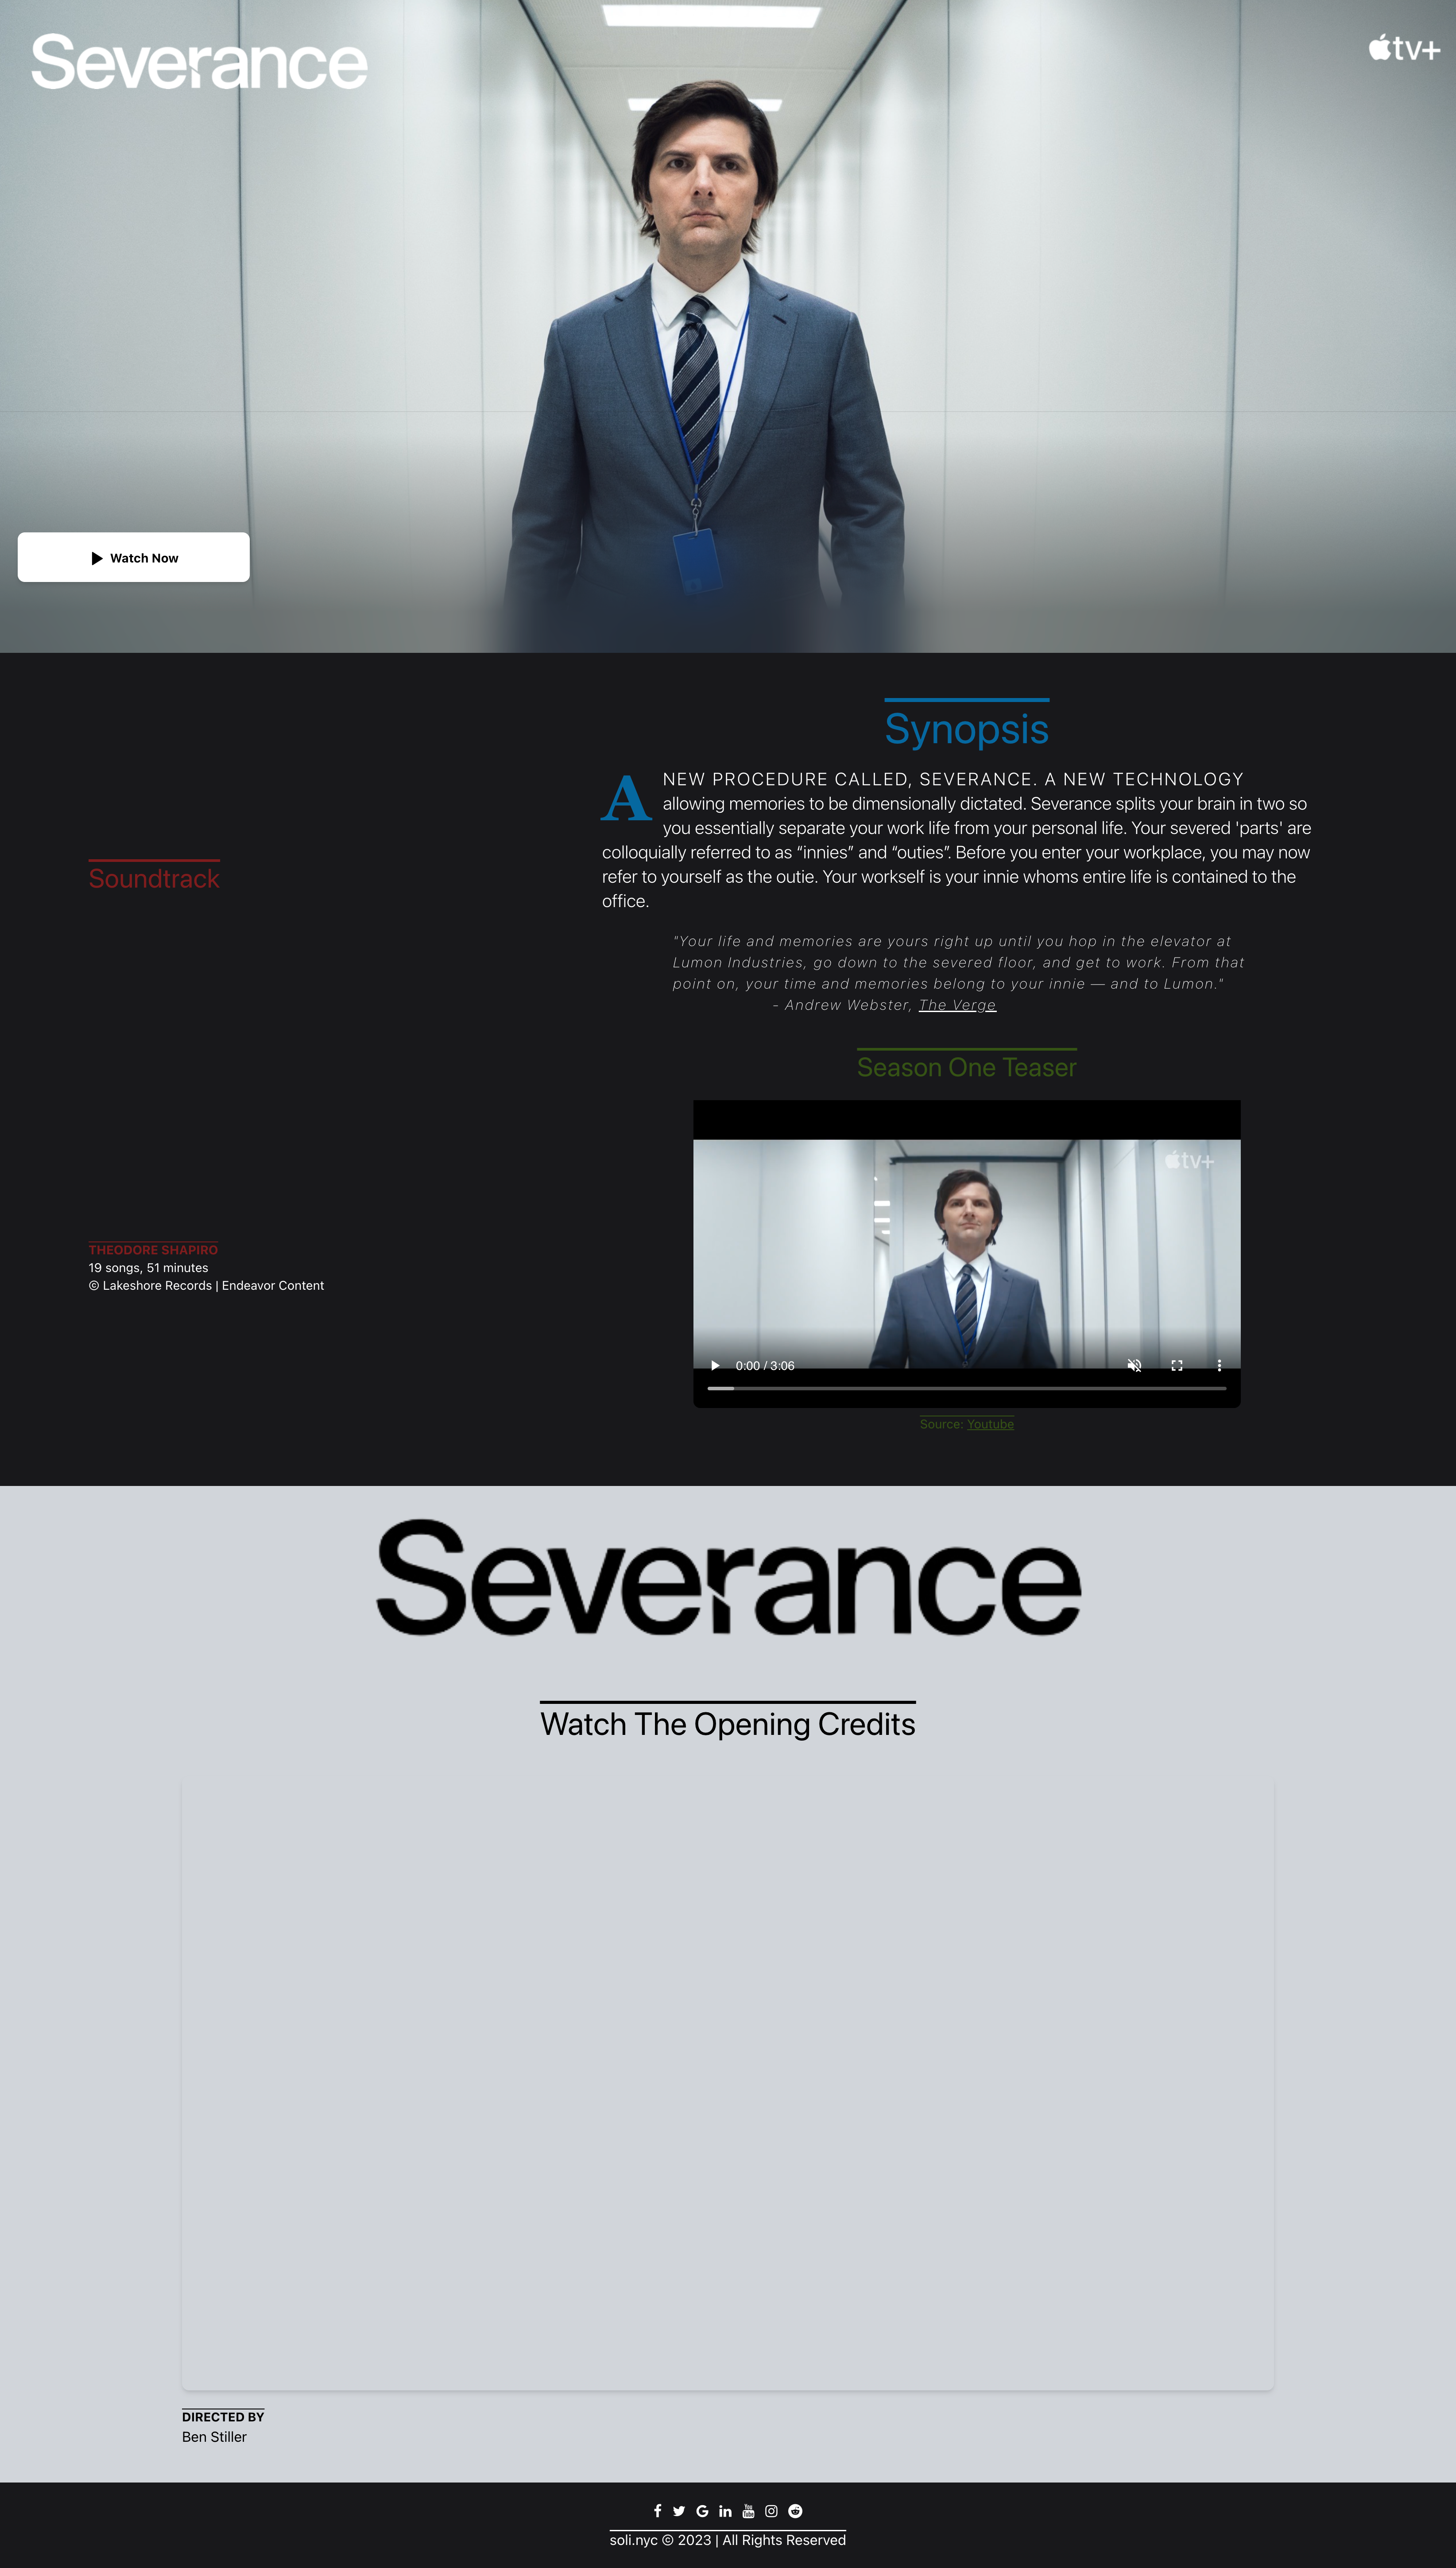 Severance TV Show Fan Page created using HTML CSS & Tailwind